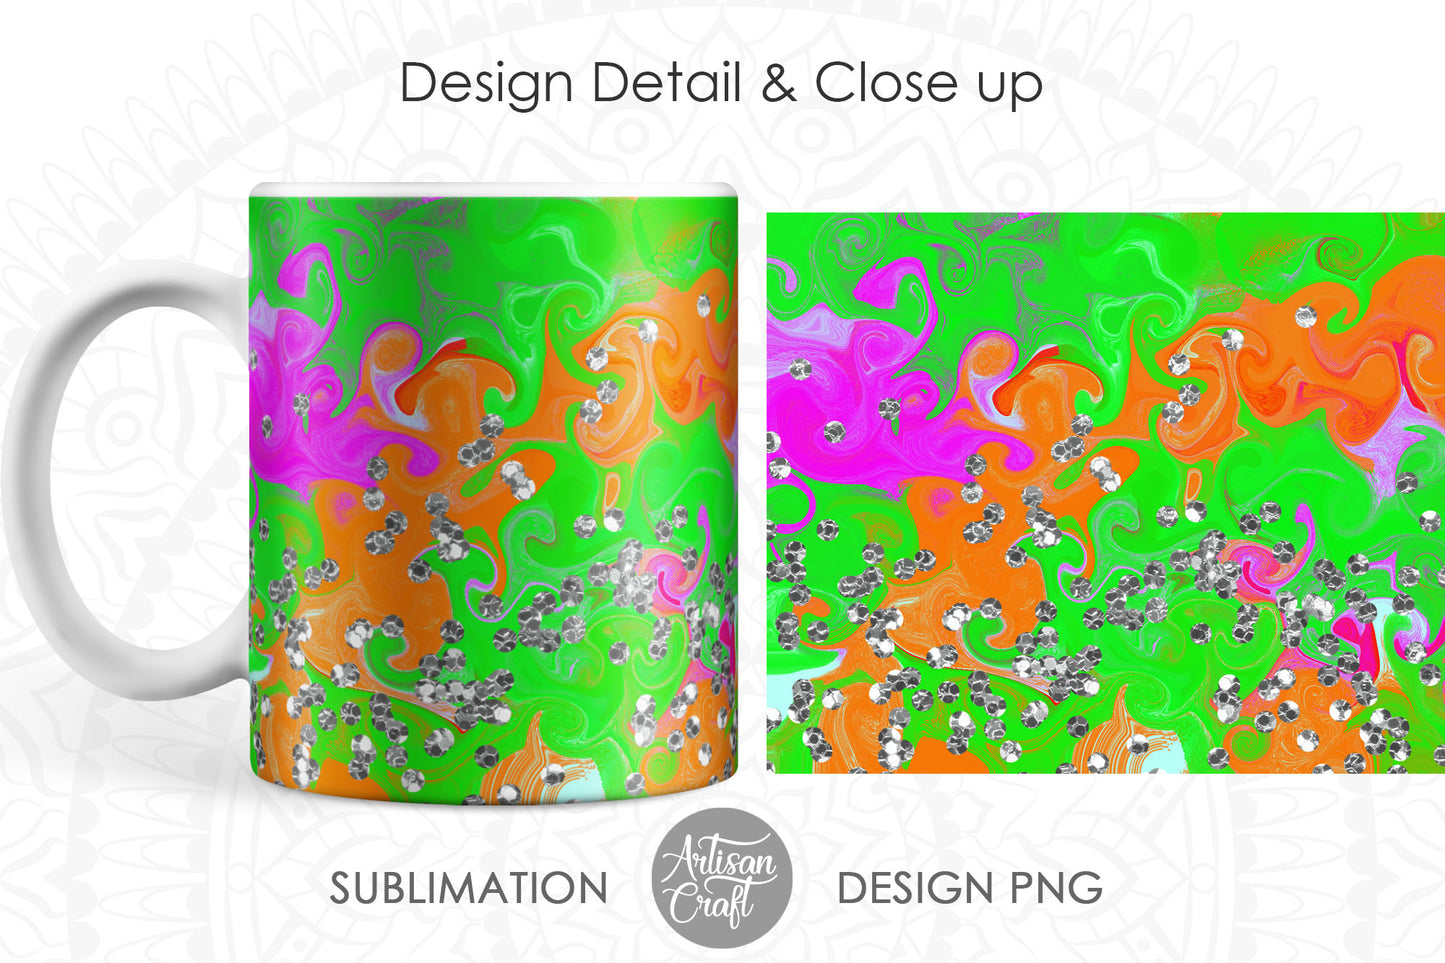 Mug sublimation PNG with neon color